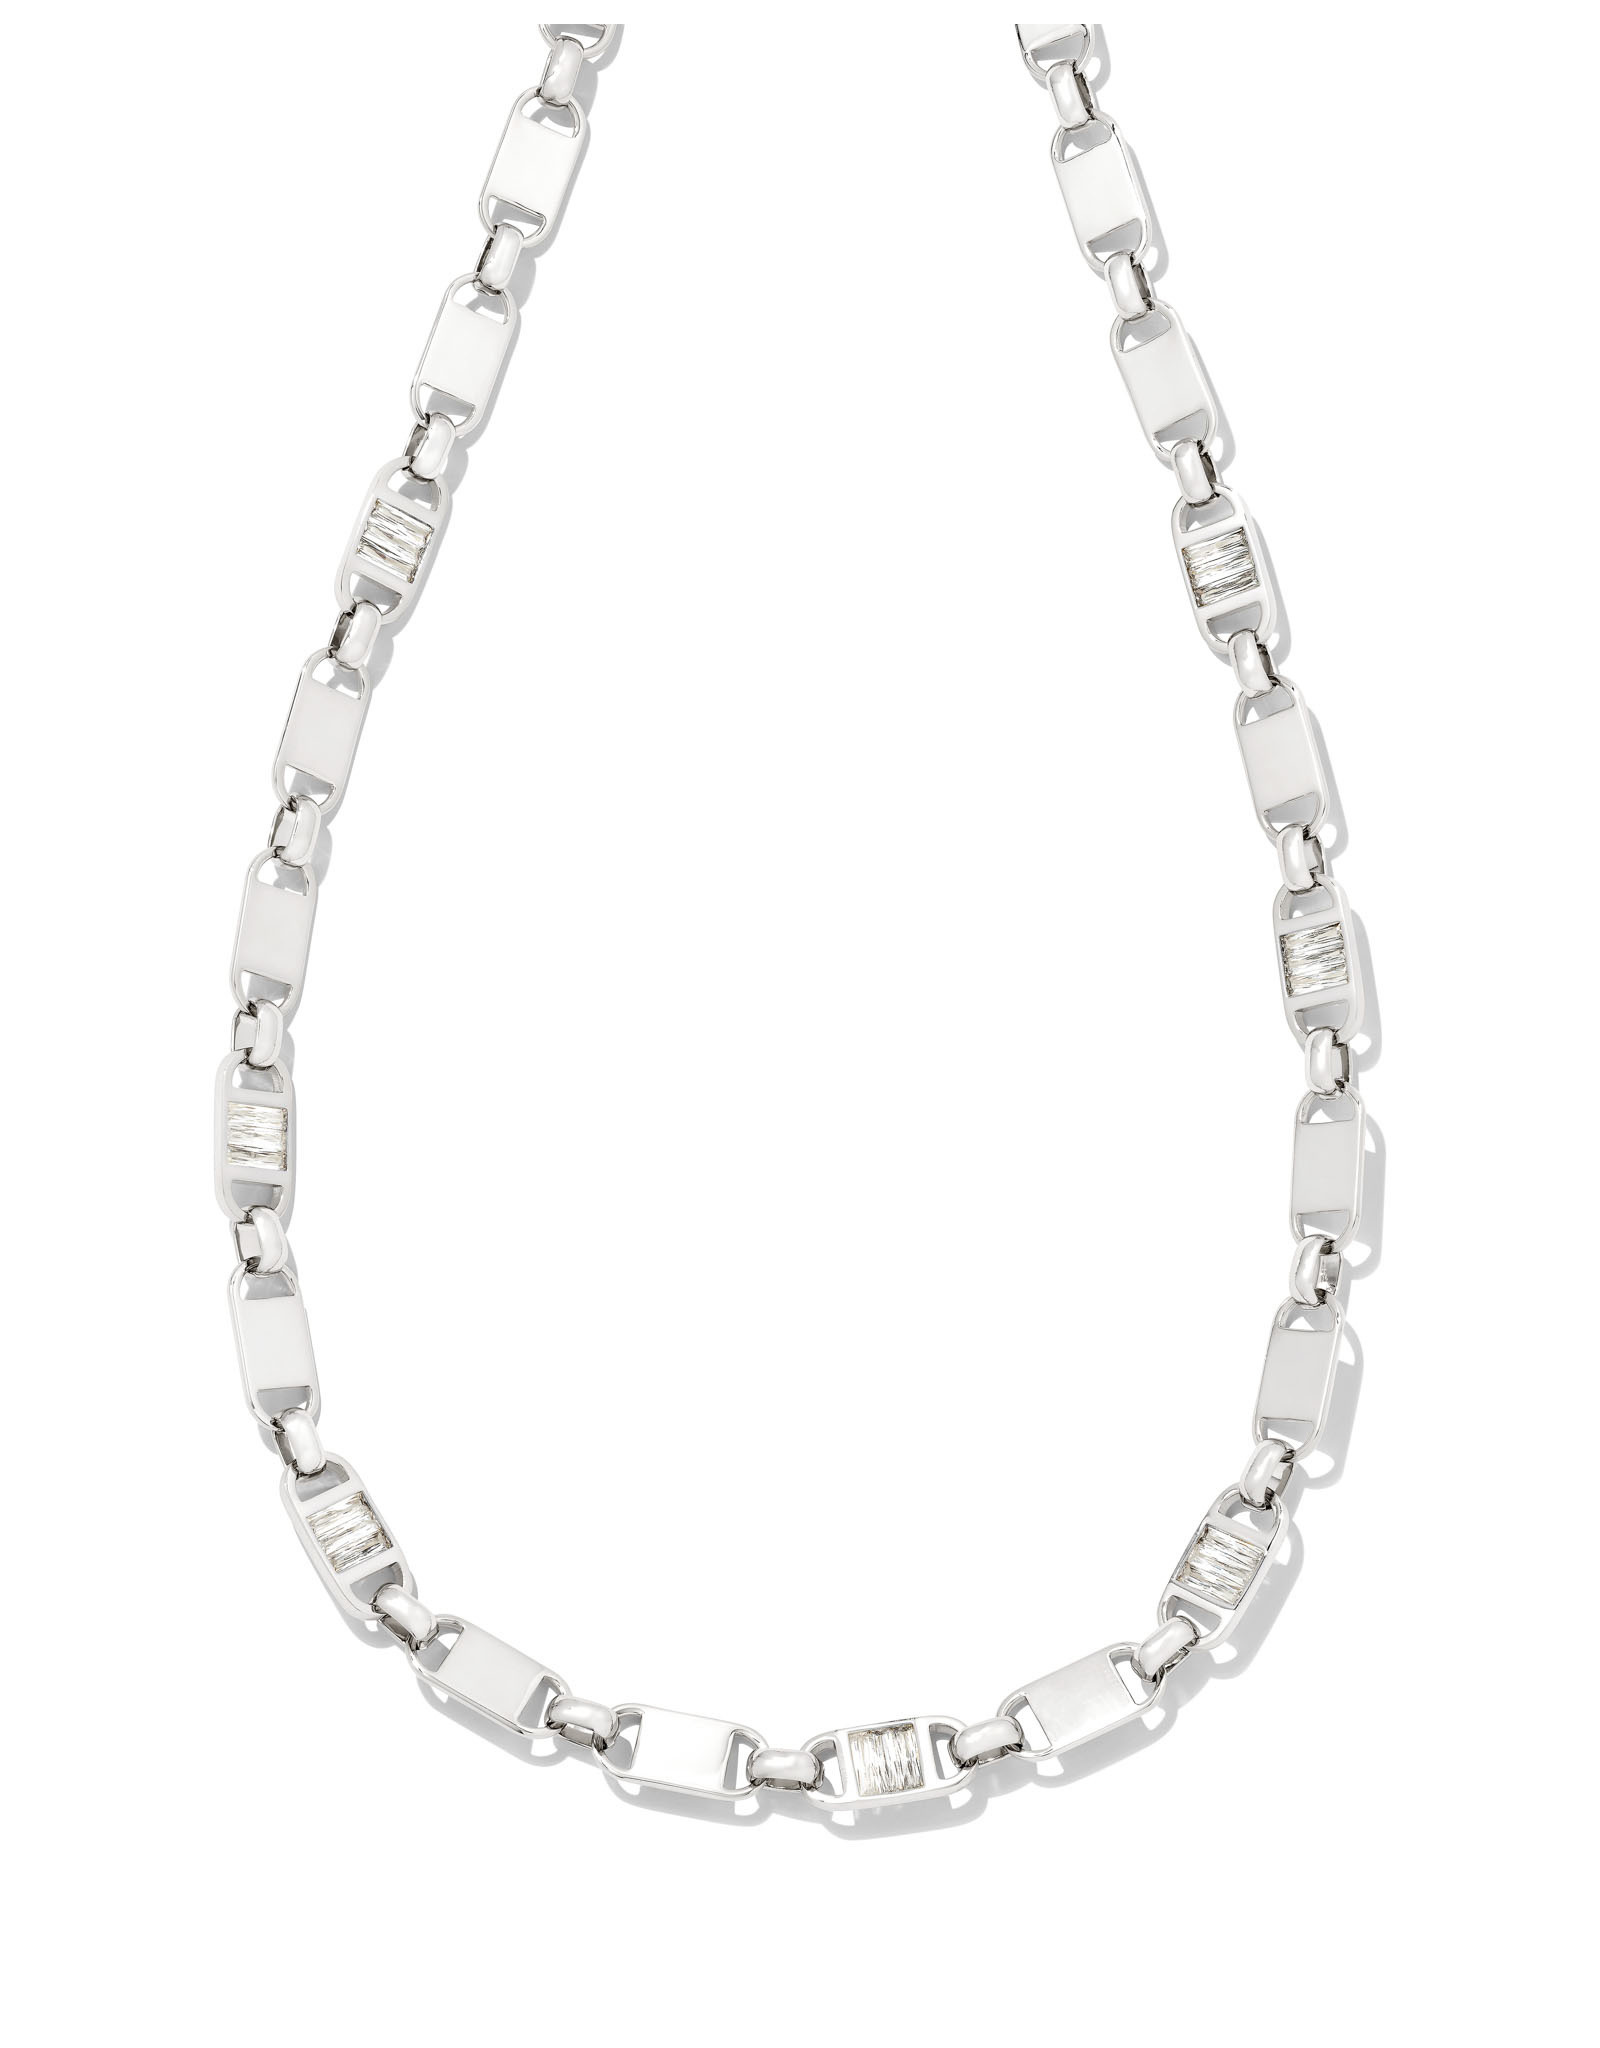 Jess Small Lock Chain Necklace in Silver